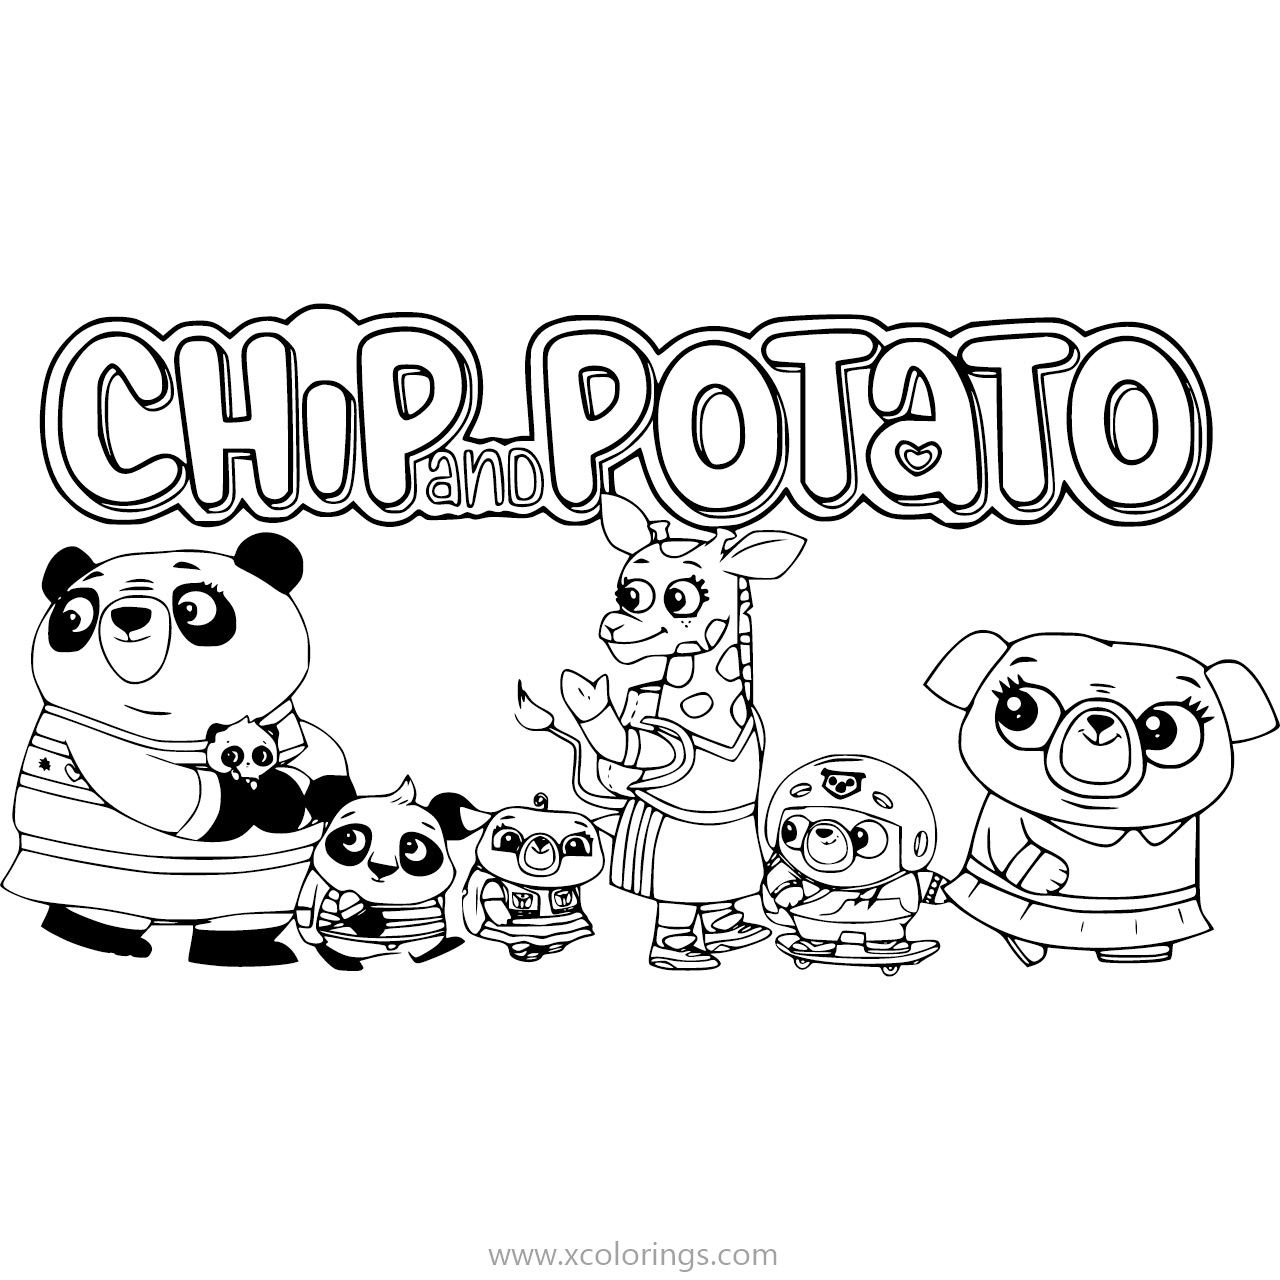 Free Chip and Potato Coloring Pages Characters printable